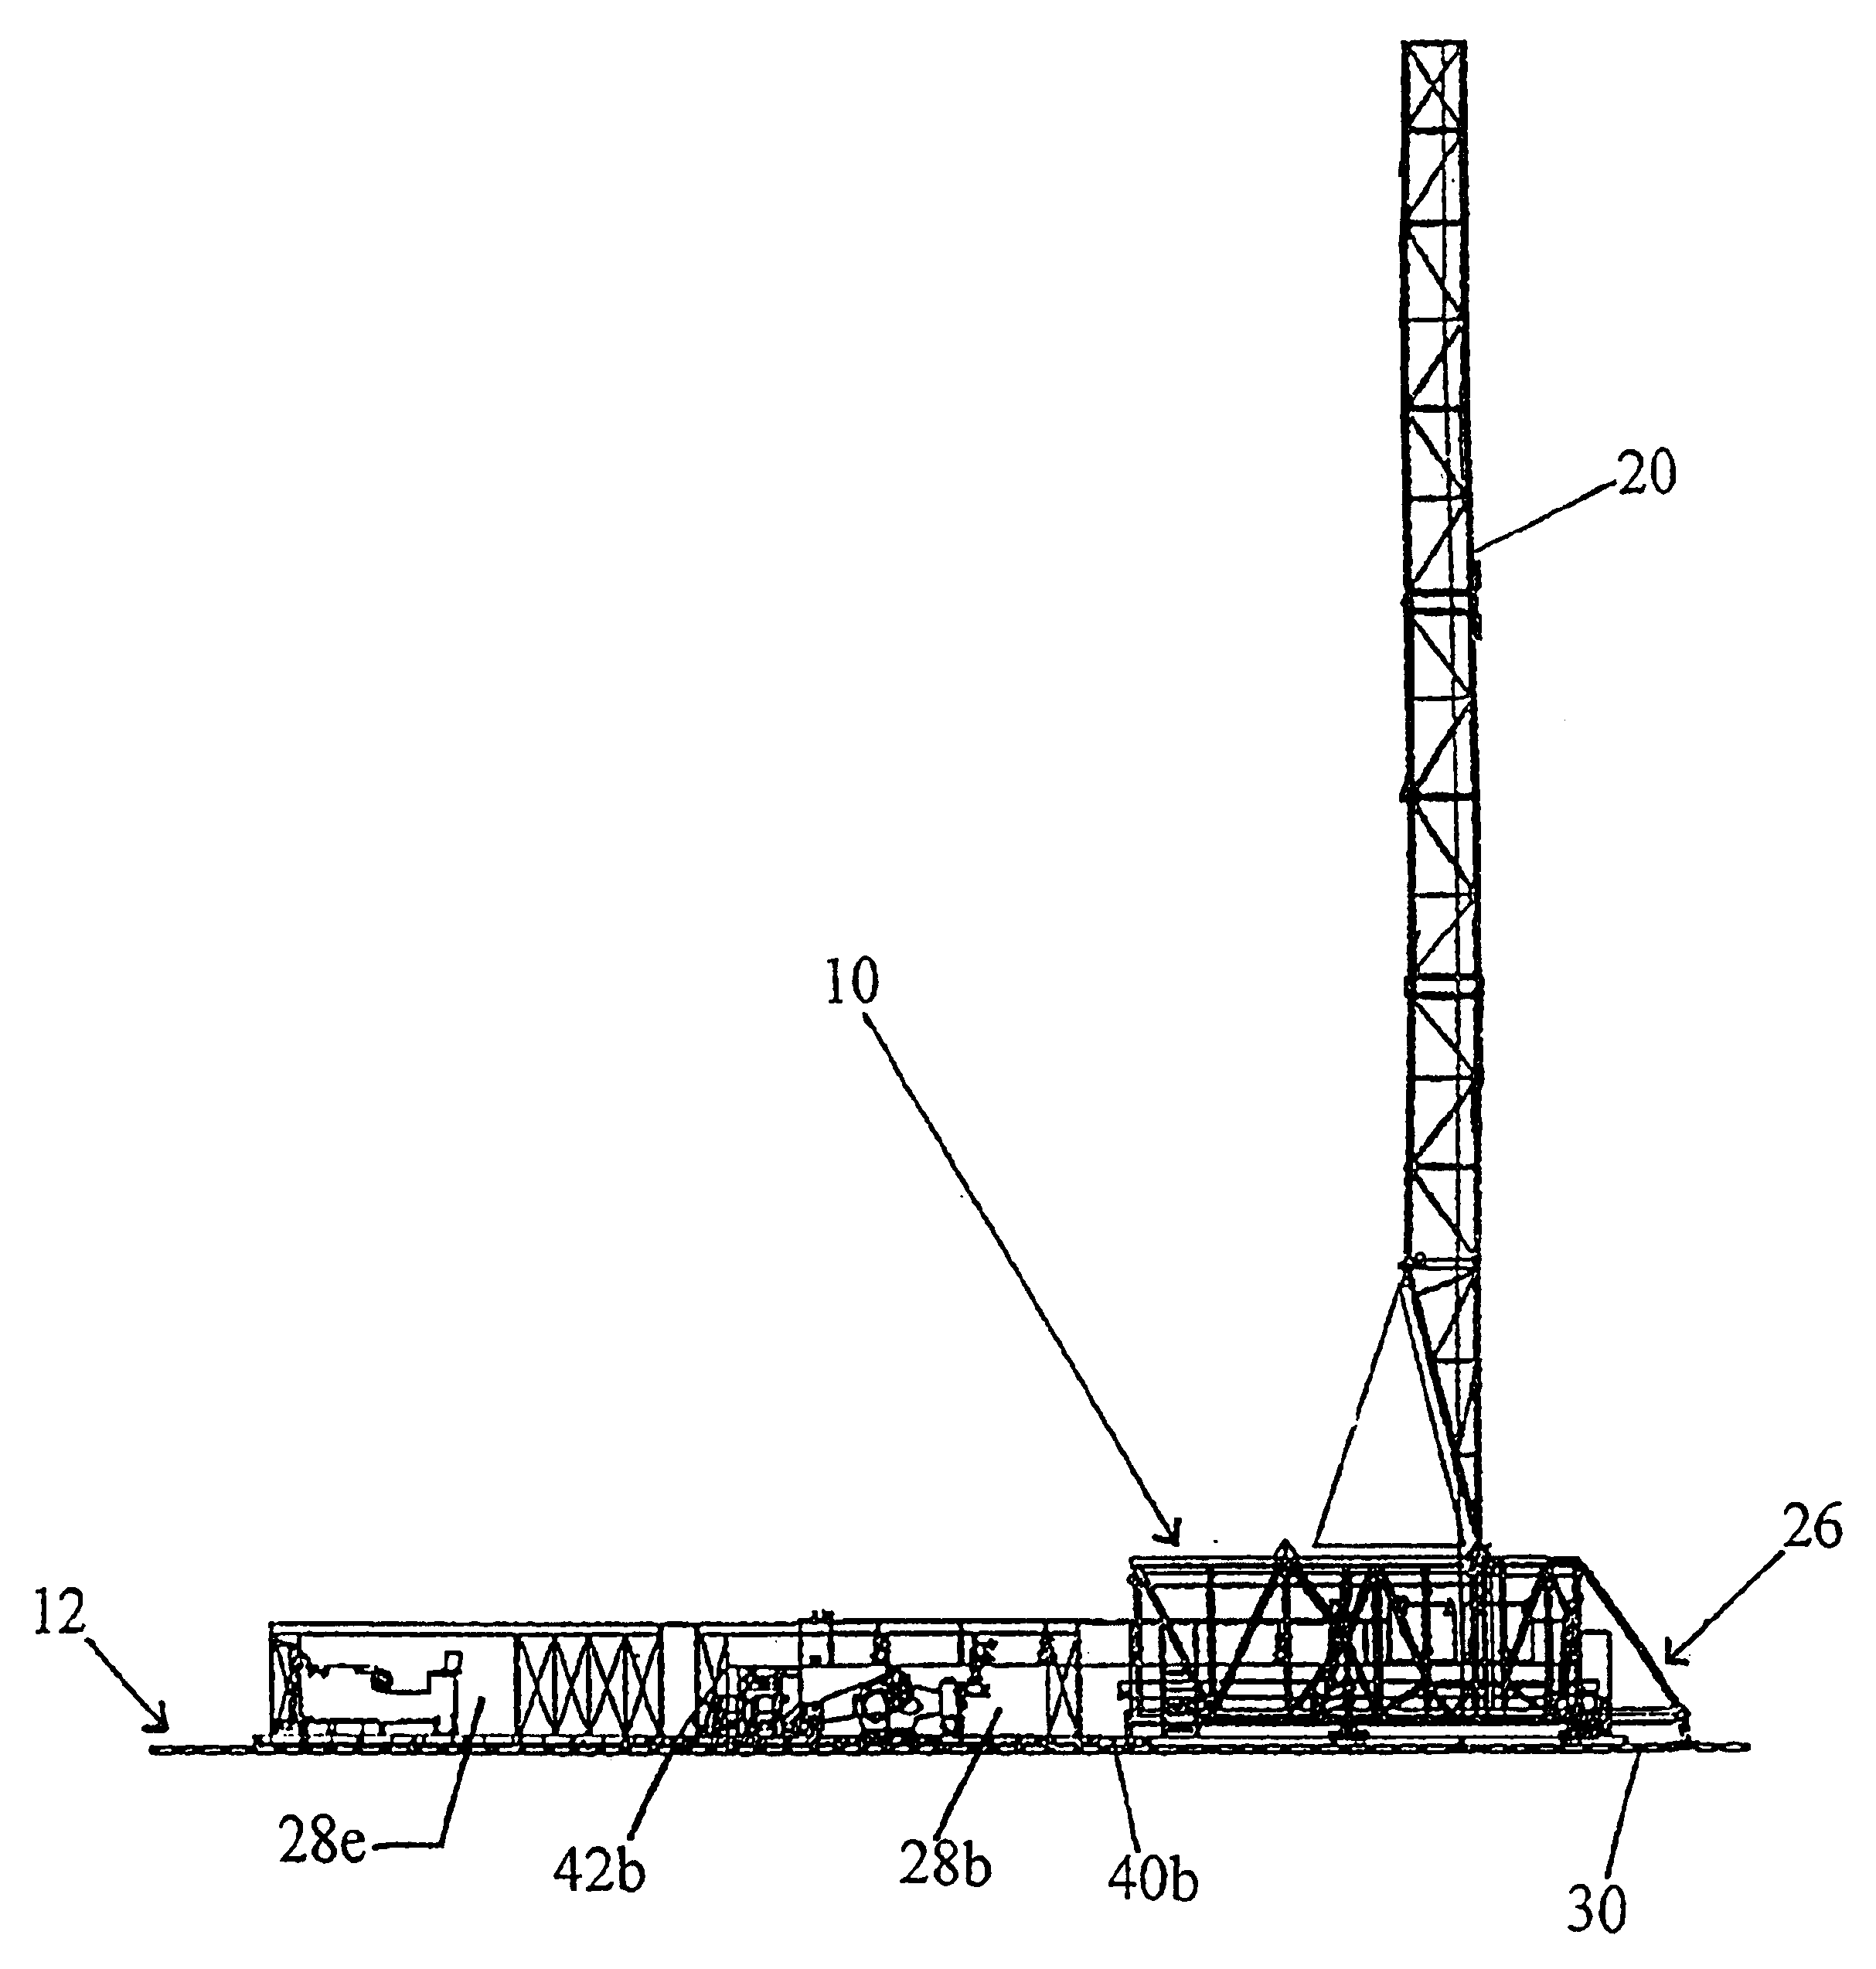 Method and apparatus for interconnected, rolling rig and oilfield building(s)